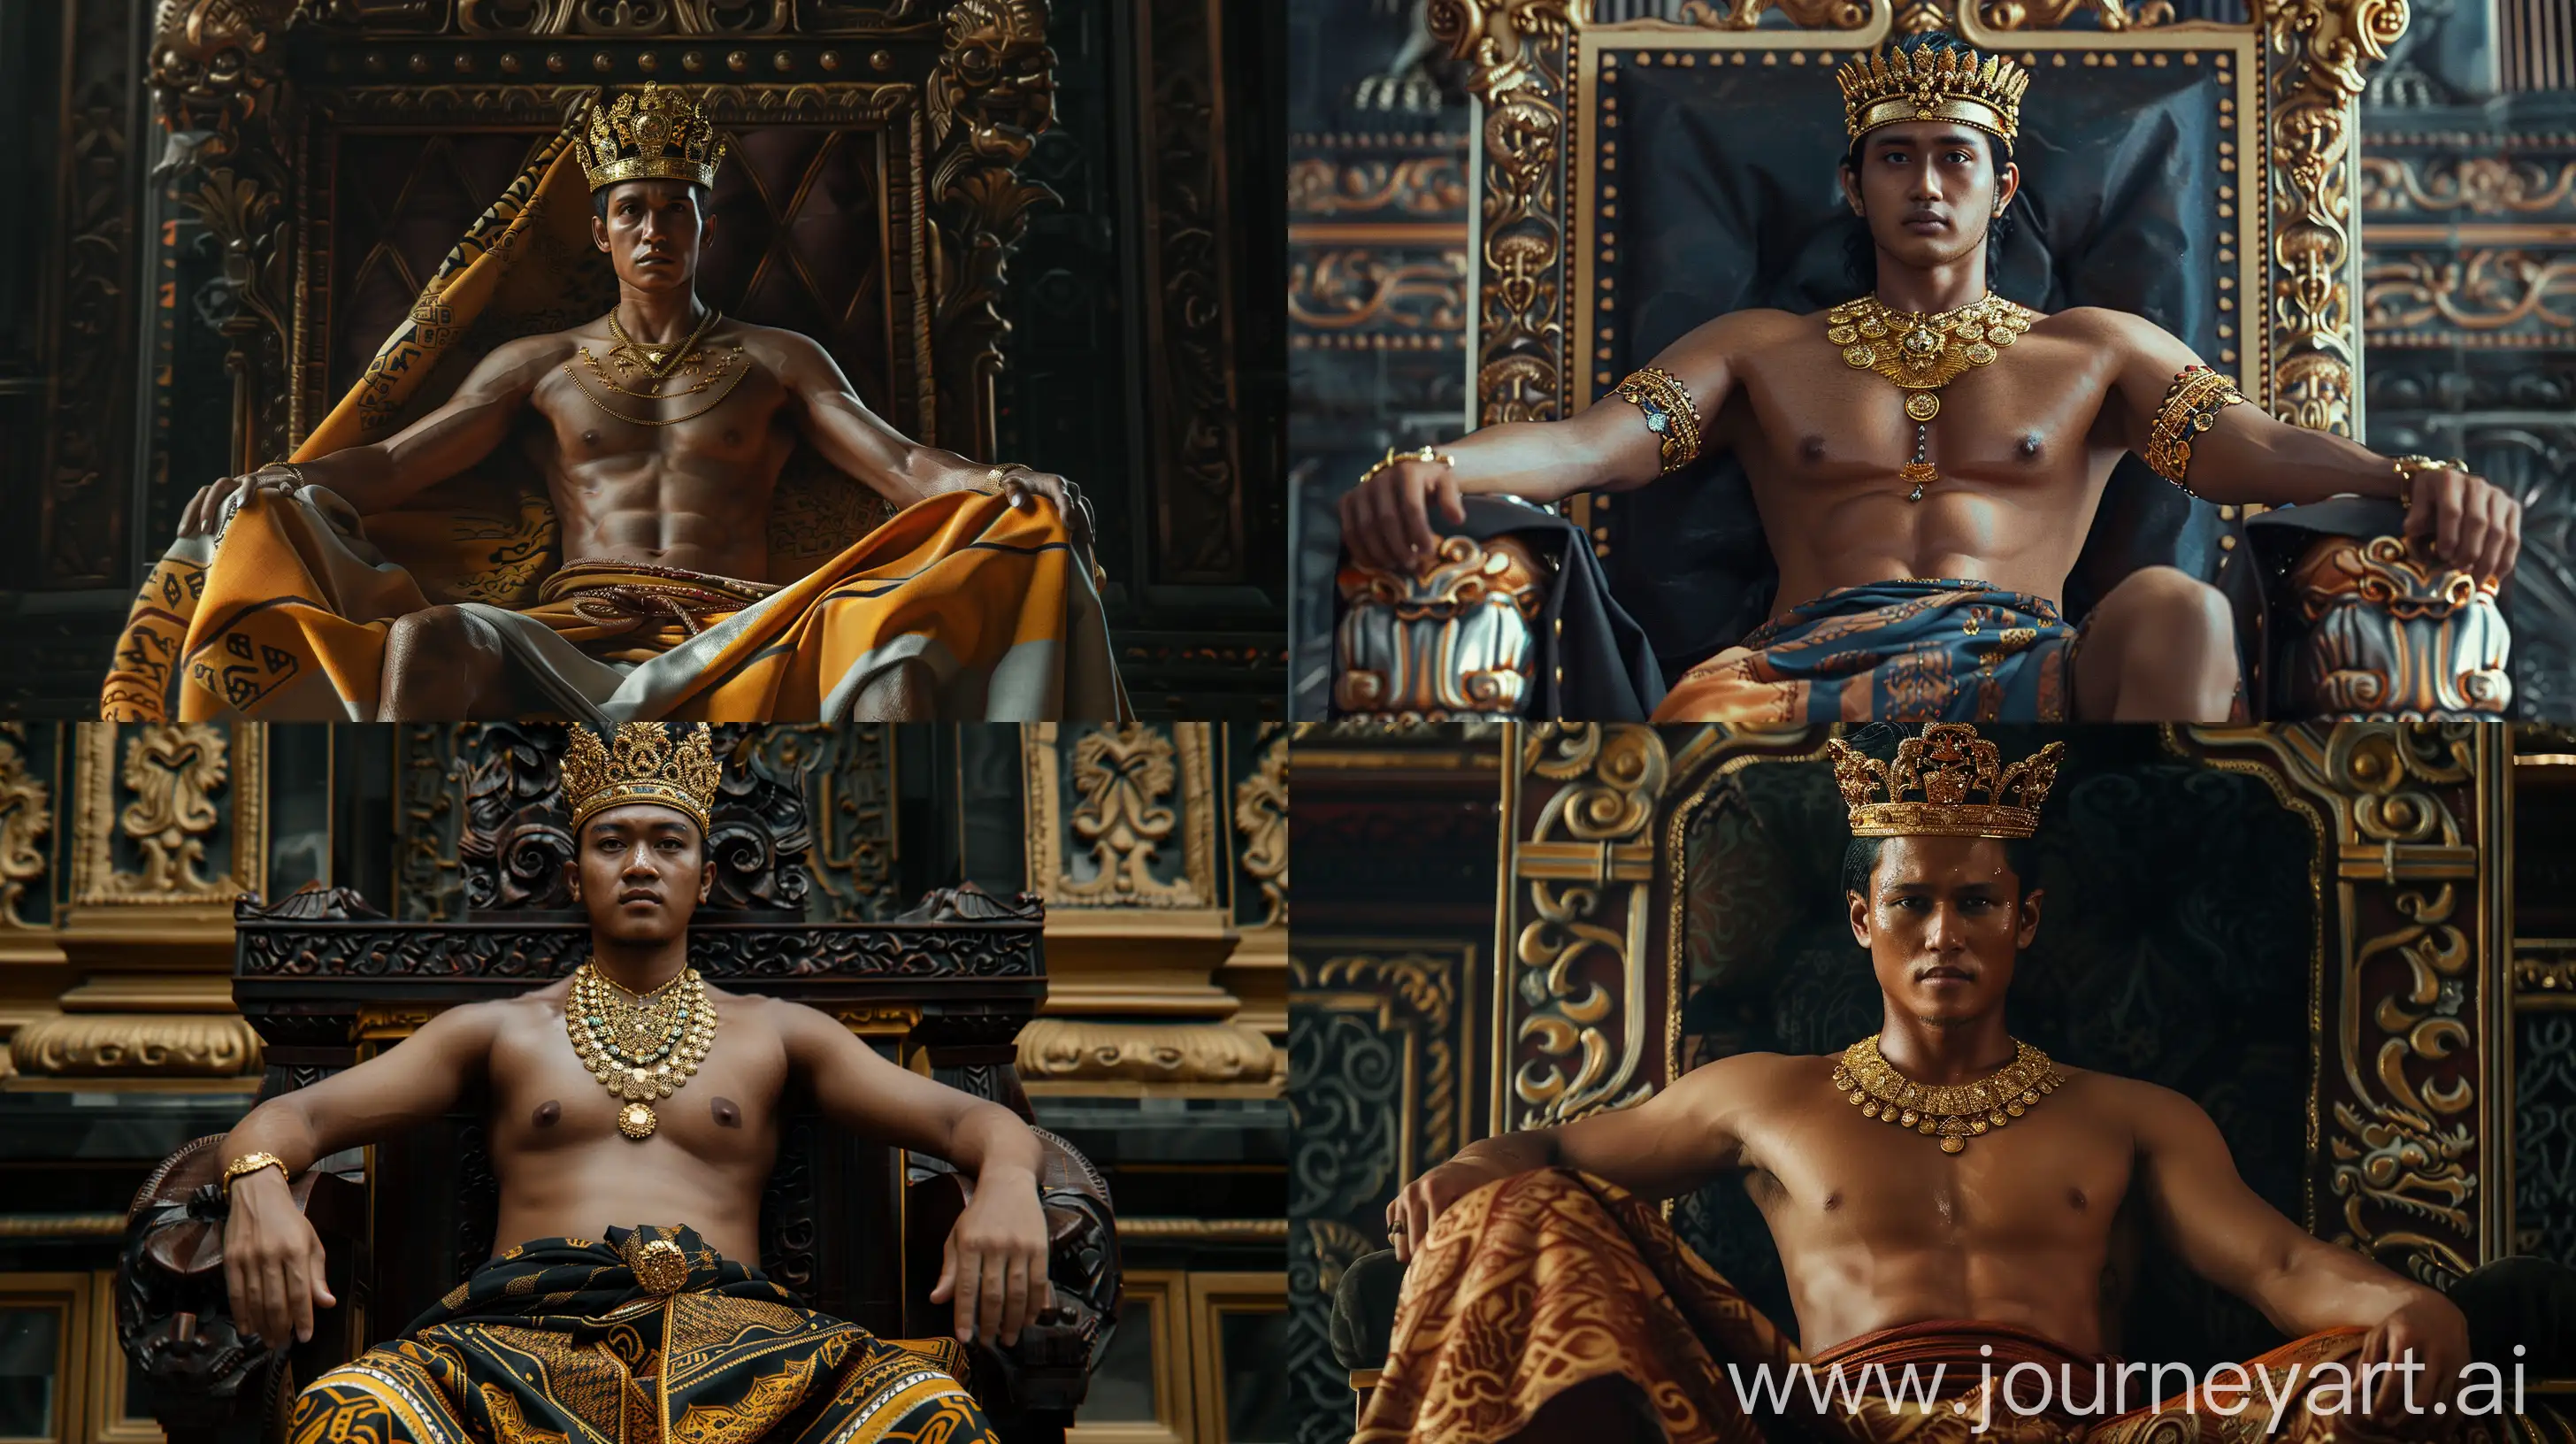 Prabu Siliwangi, without a shirt, wears a crown on his head, wears gold decorations around his neck, wears a typical Sundanese songket cloth, the cloth is wrapped around his waist and hangs down to his ankles. traditional royal sarong, sitting on the throne, super realistic, nice detail, --v 6 --ar 16:9